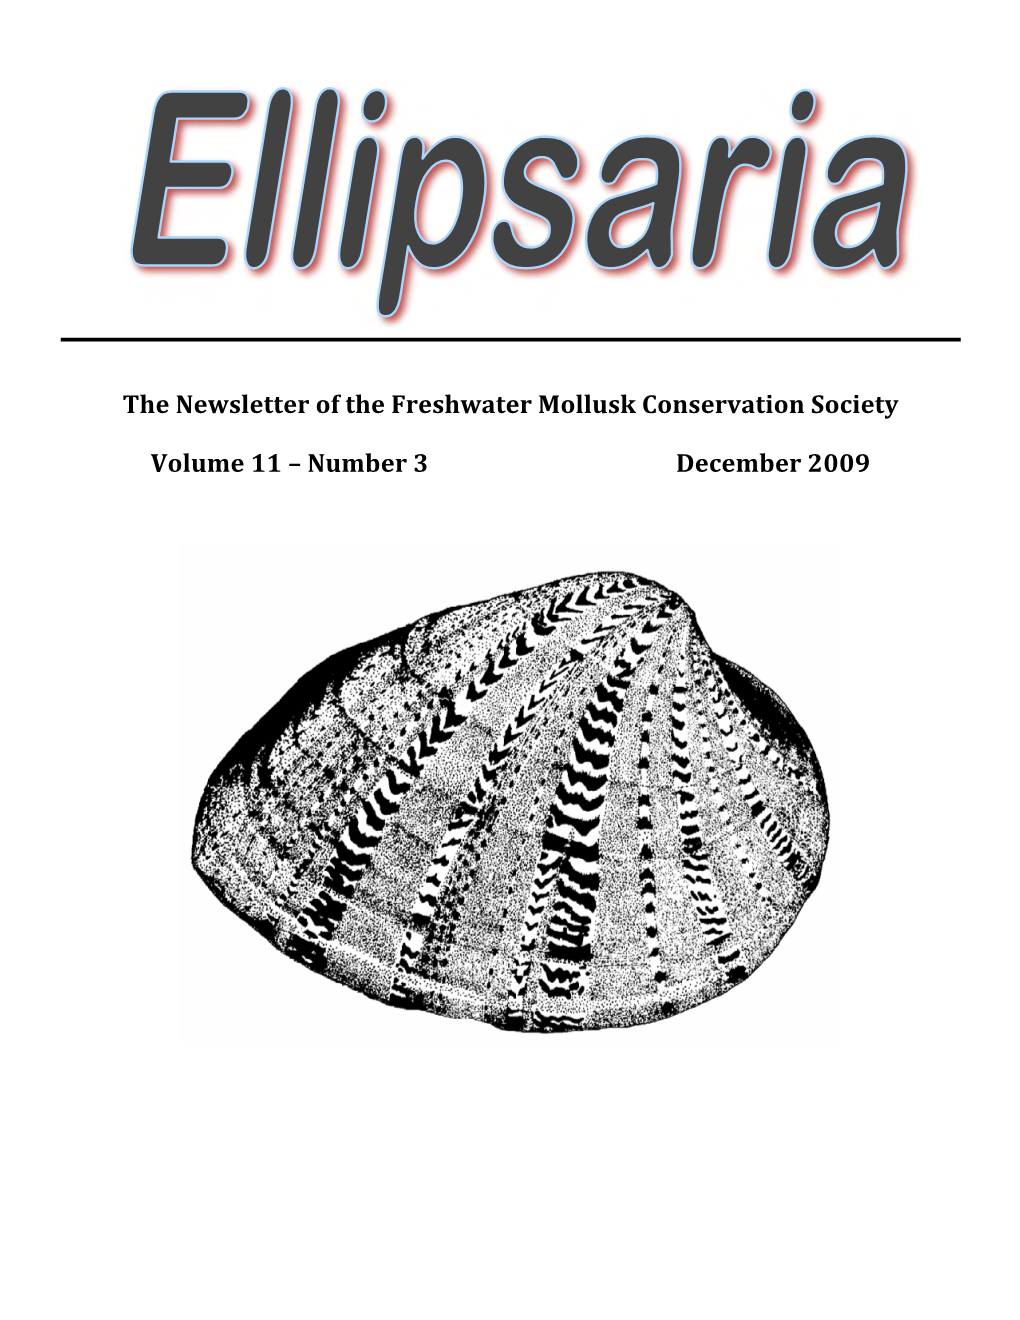 Ellipsaria) Which Would Take Effect at the 2011 Symposium